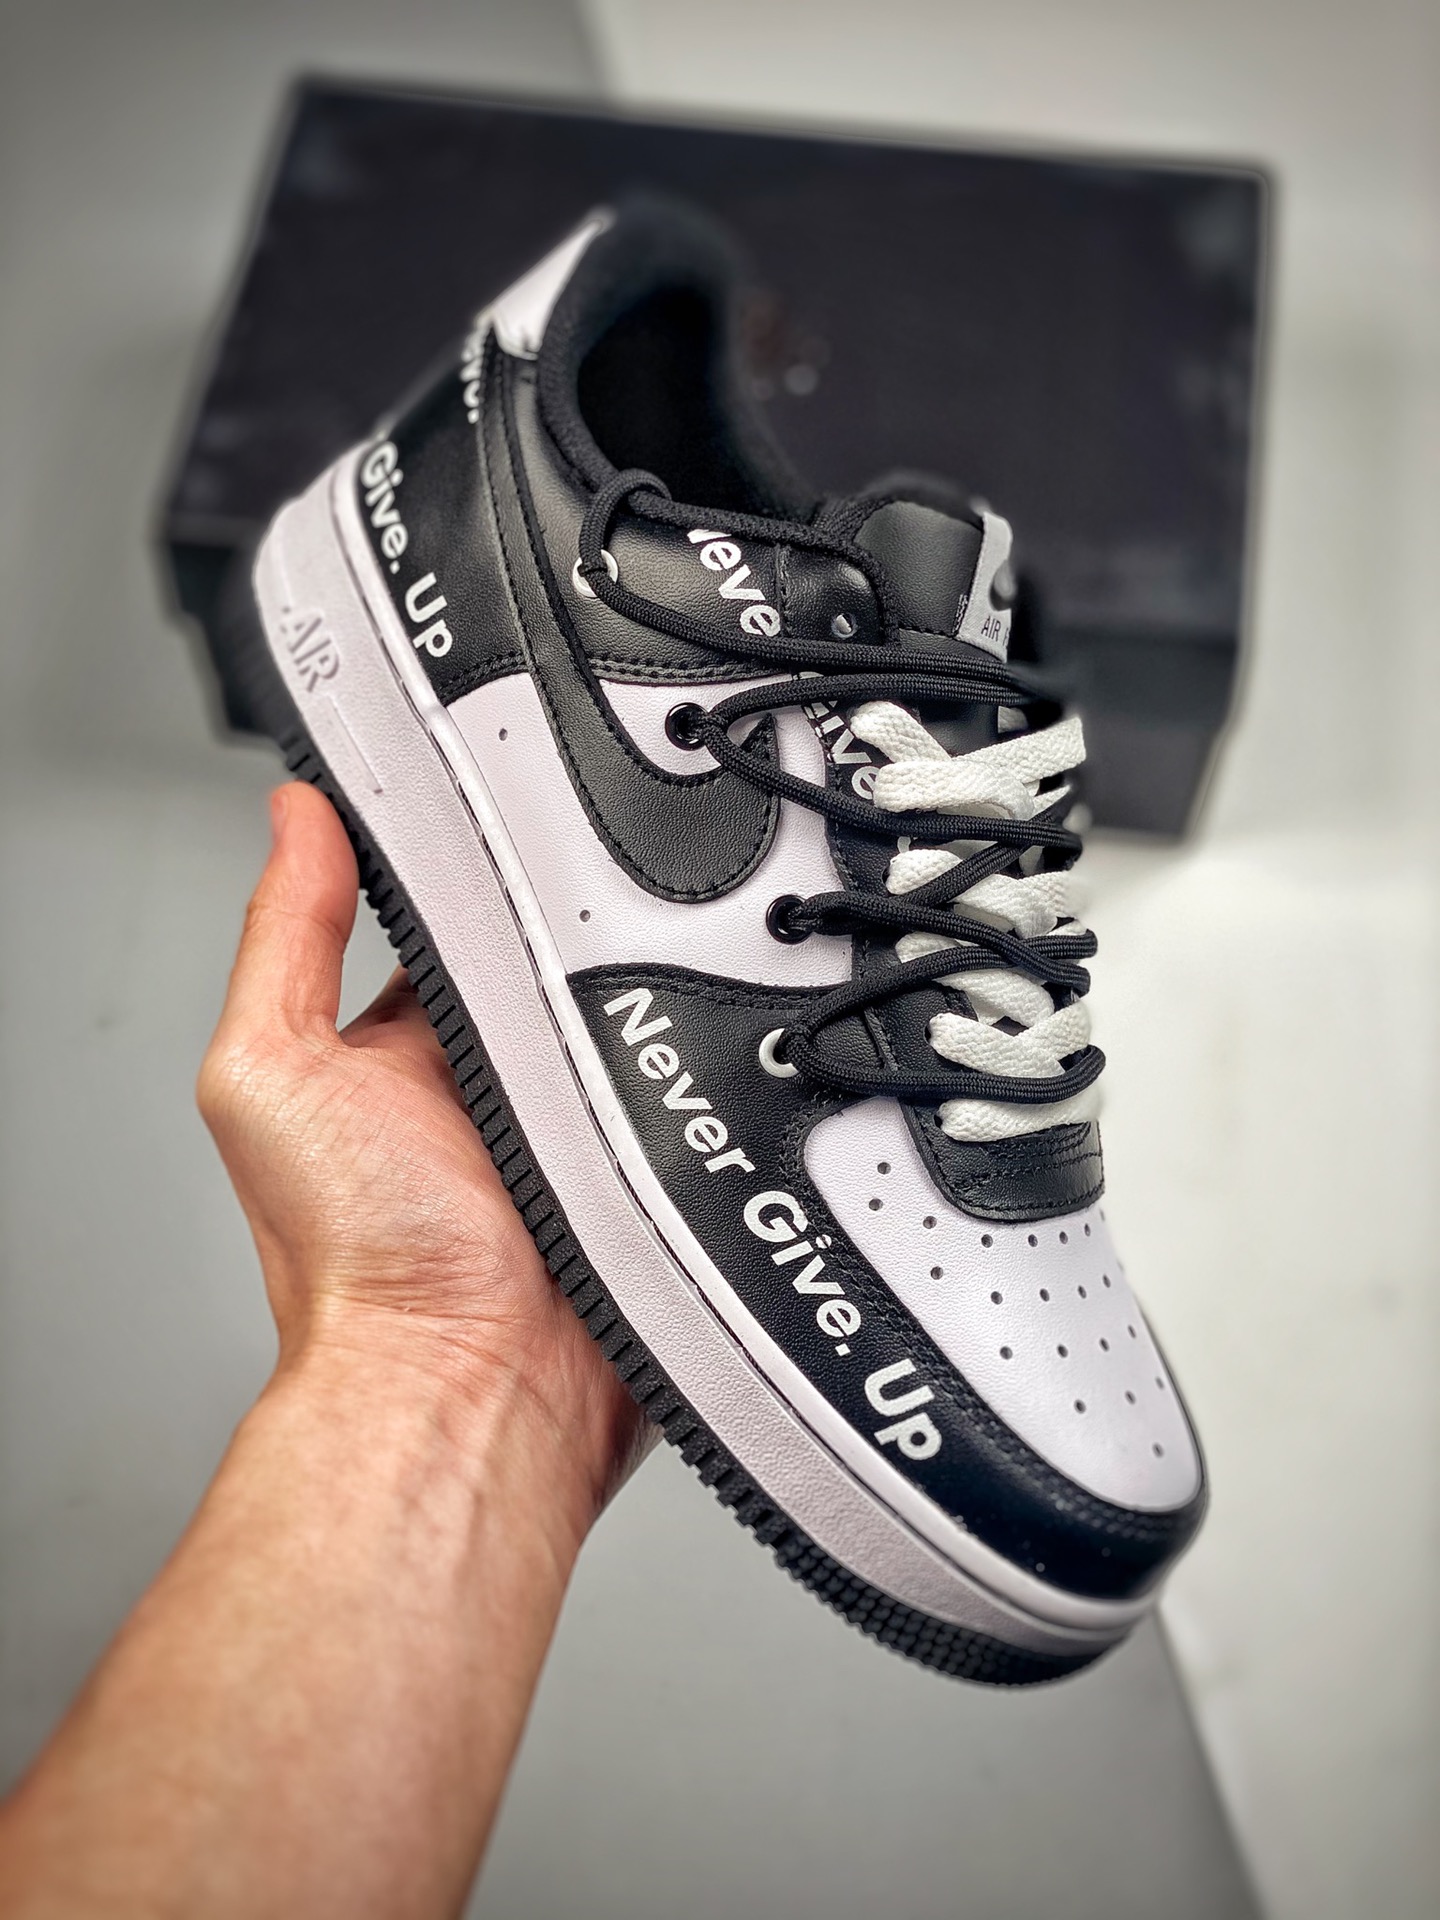 Nike Air AF Force 1 Low 'Never Give up' Black White Shoes